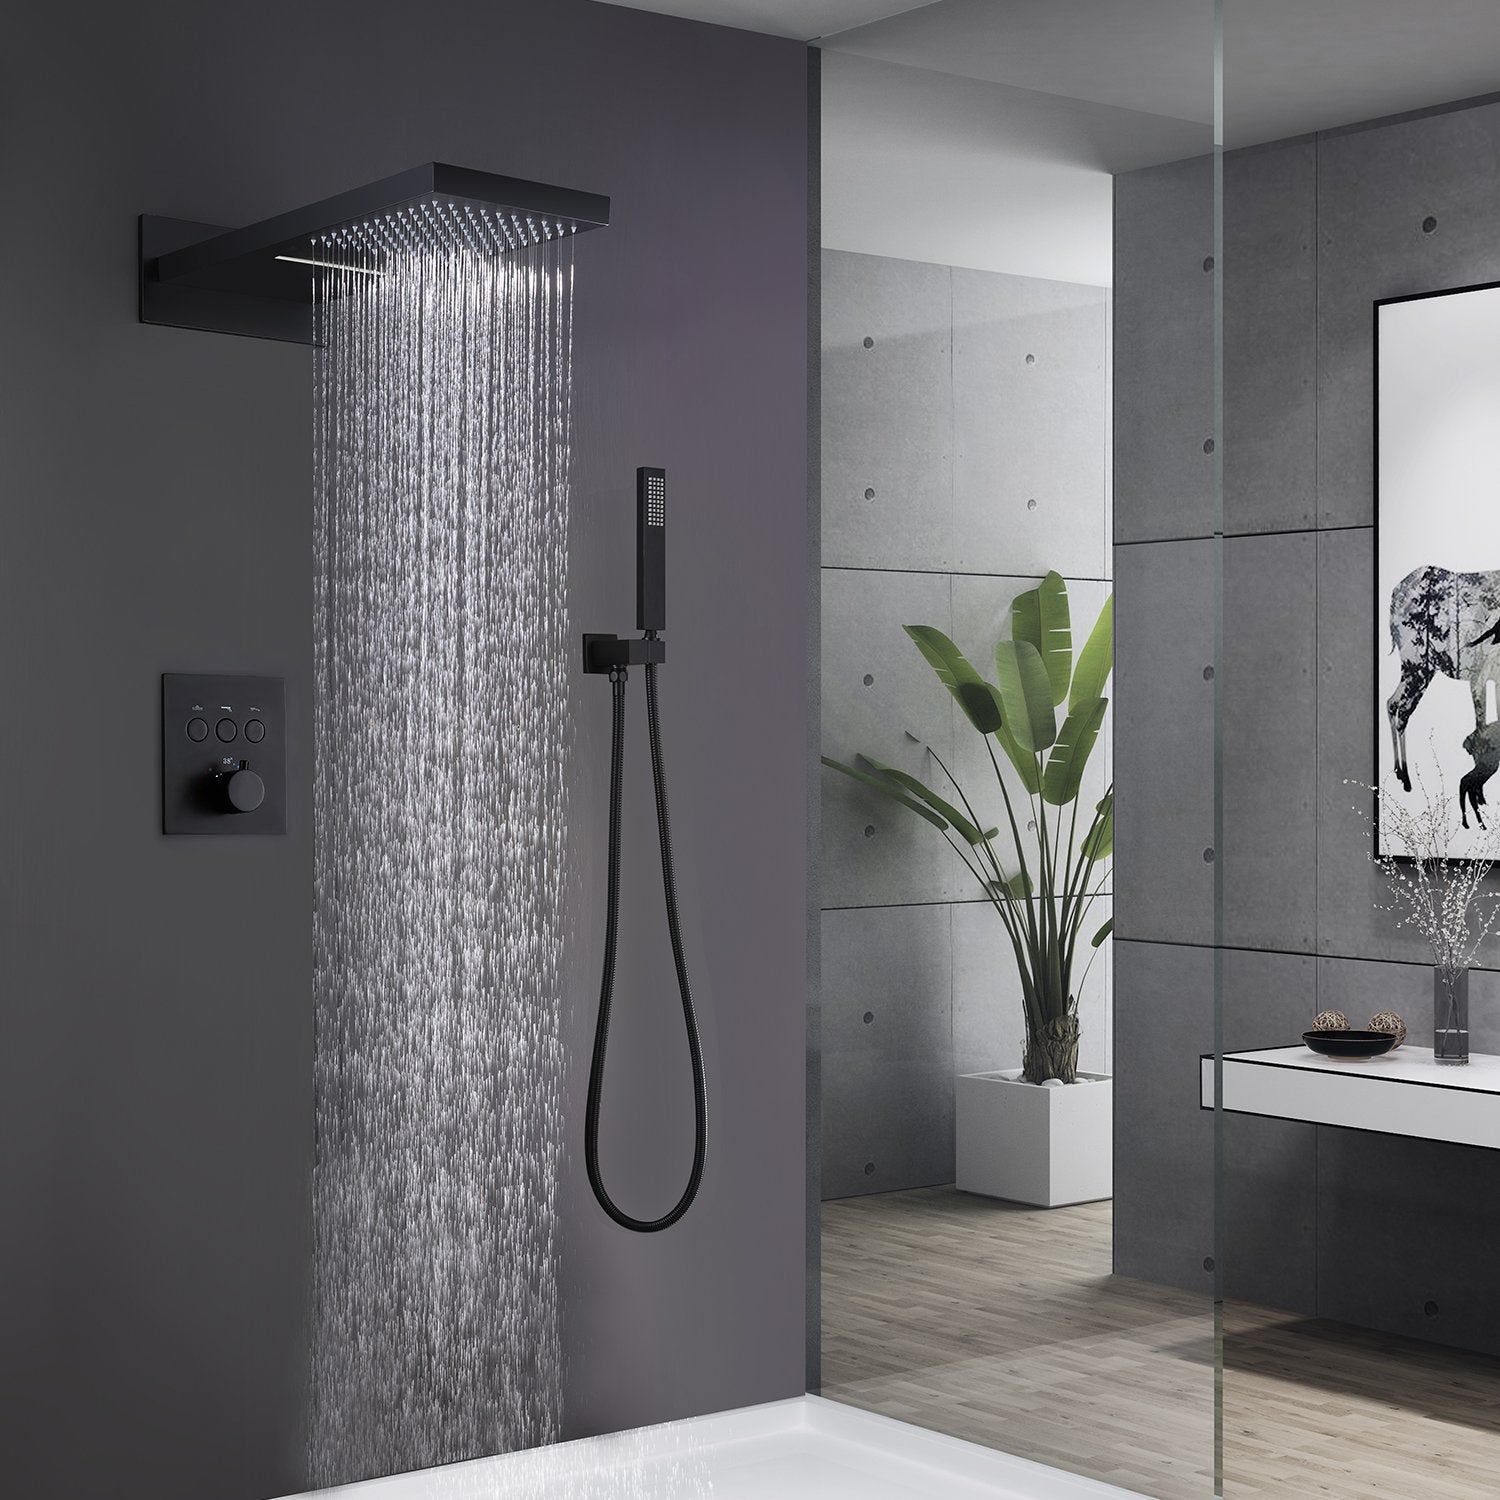 Clihome® | Waterfall Top Spray Wall Type Bathroom Shower System with Constant temperature shower, top spray and two water outlet methods